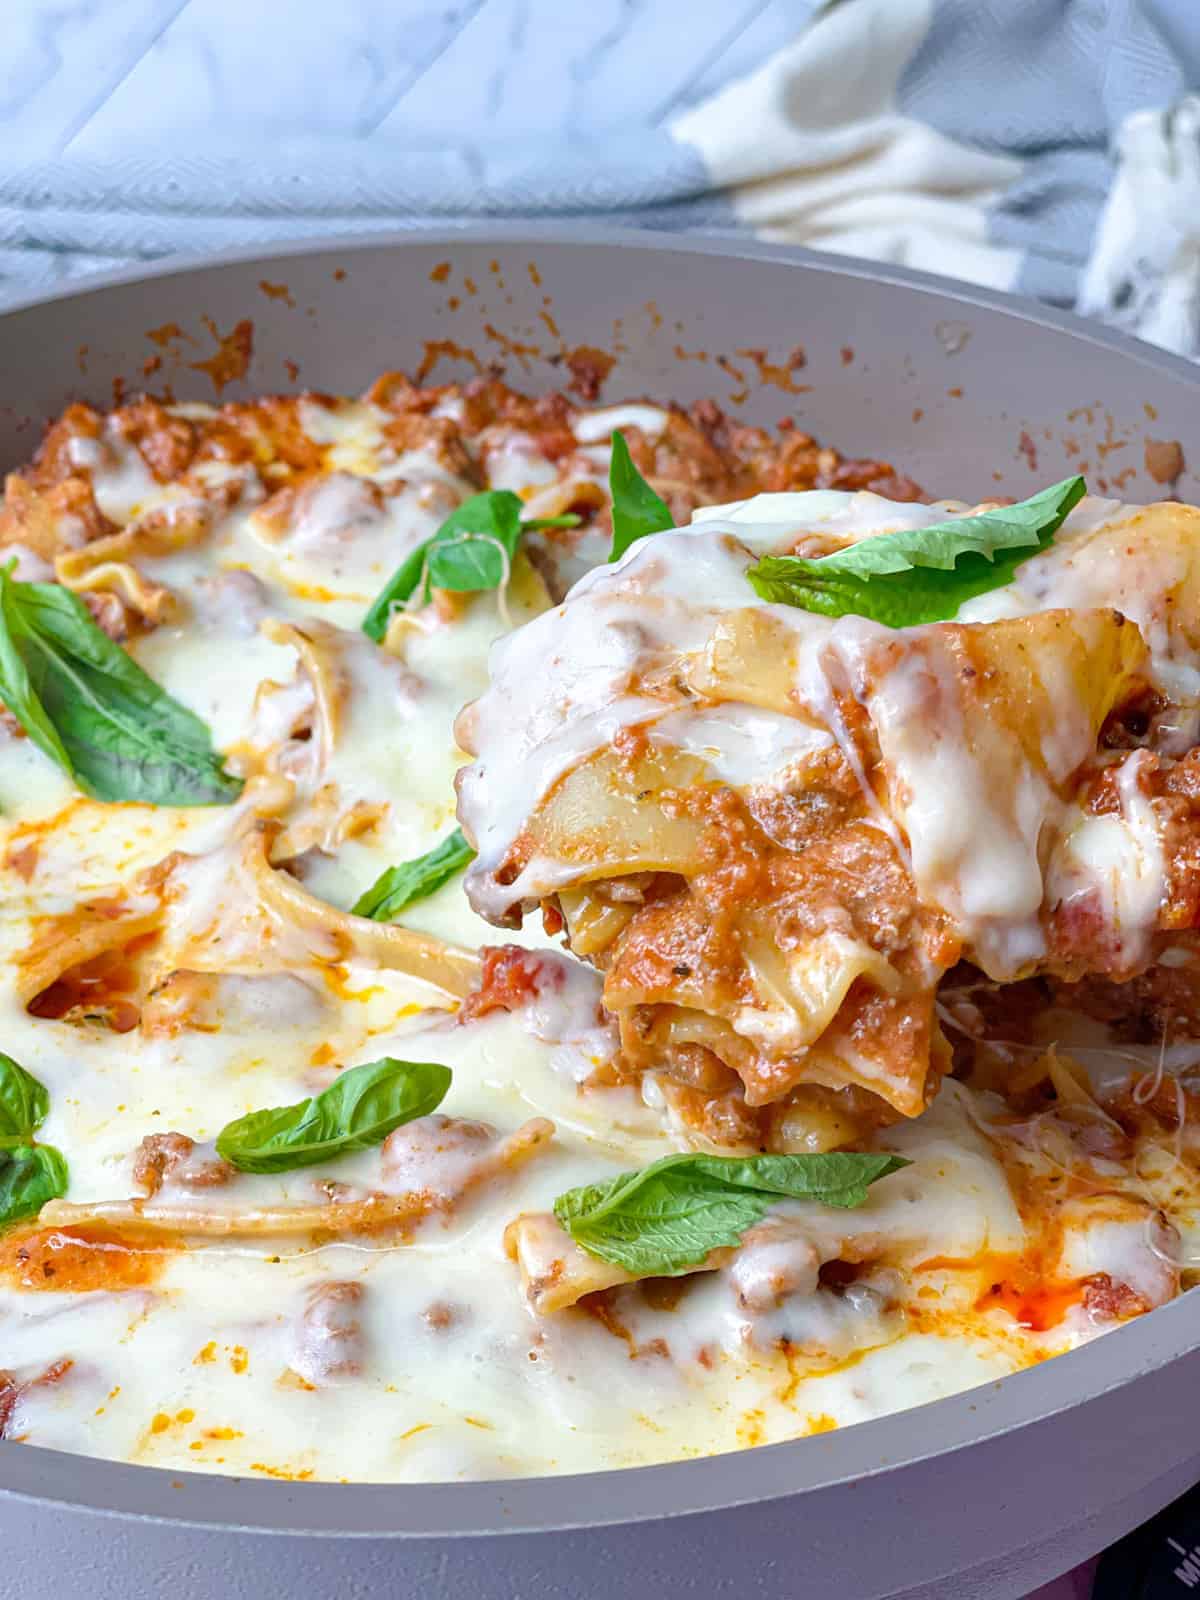 A spoon pulling some juicy lasagna pasta with red sauce, mozzarella cheese, and fresh basil.